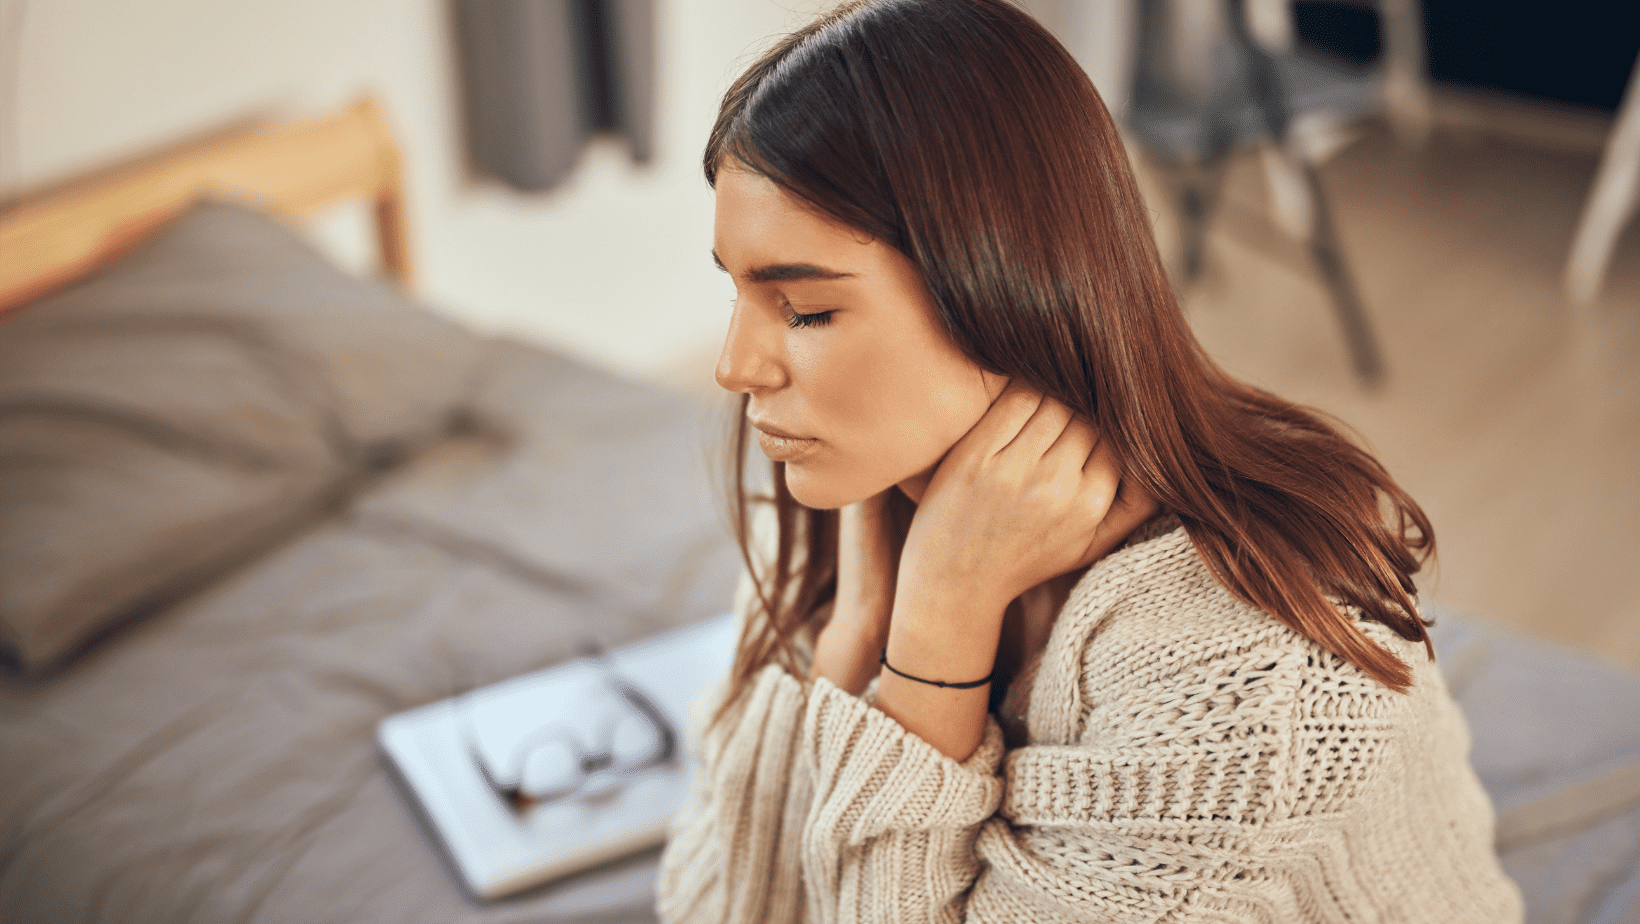 What Is Causing That Pain in Your Neck?